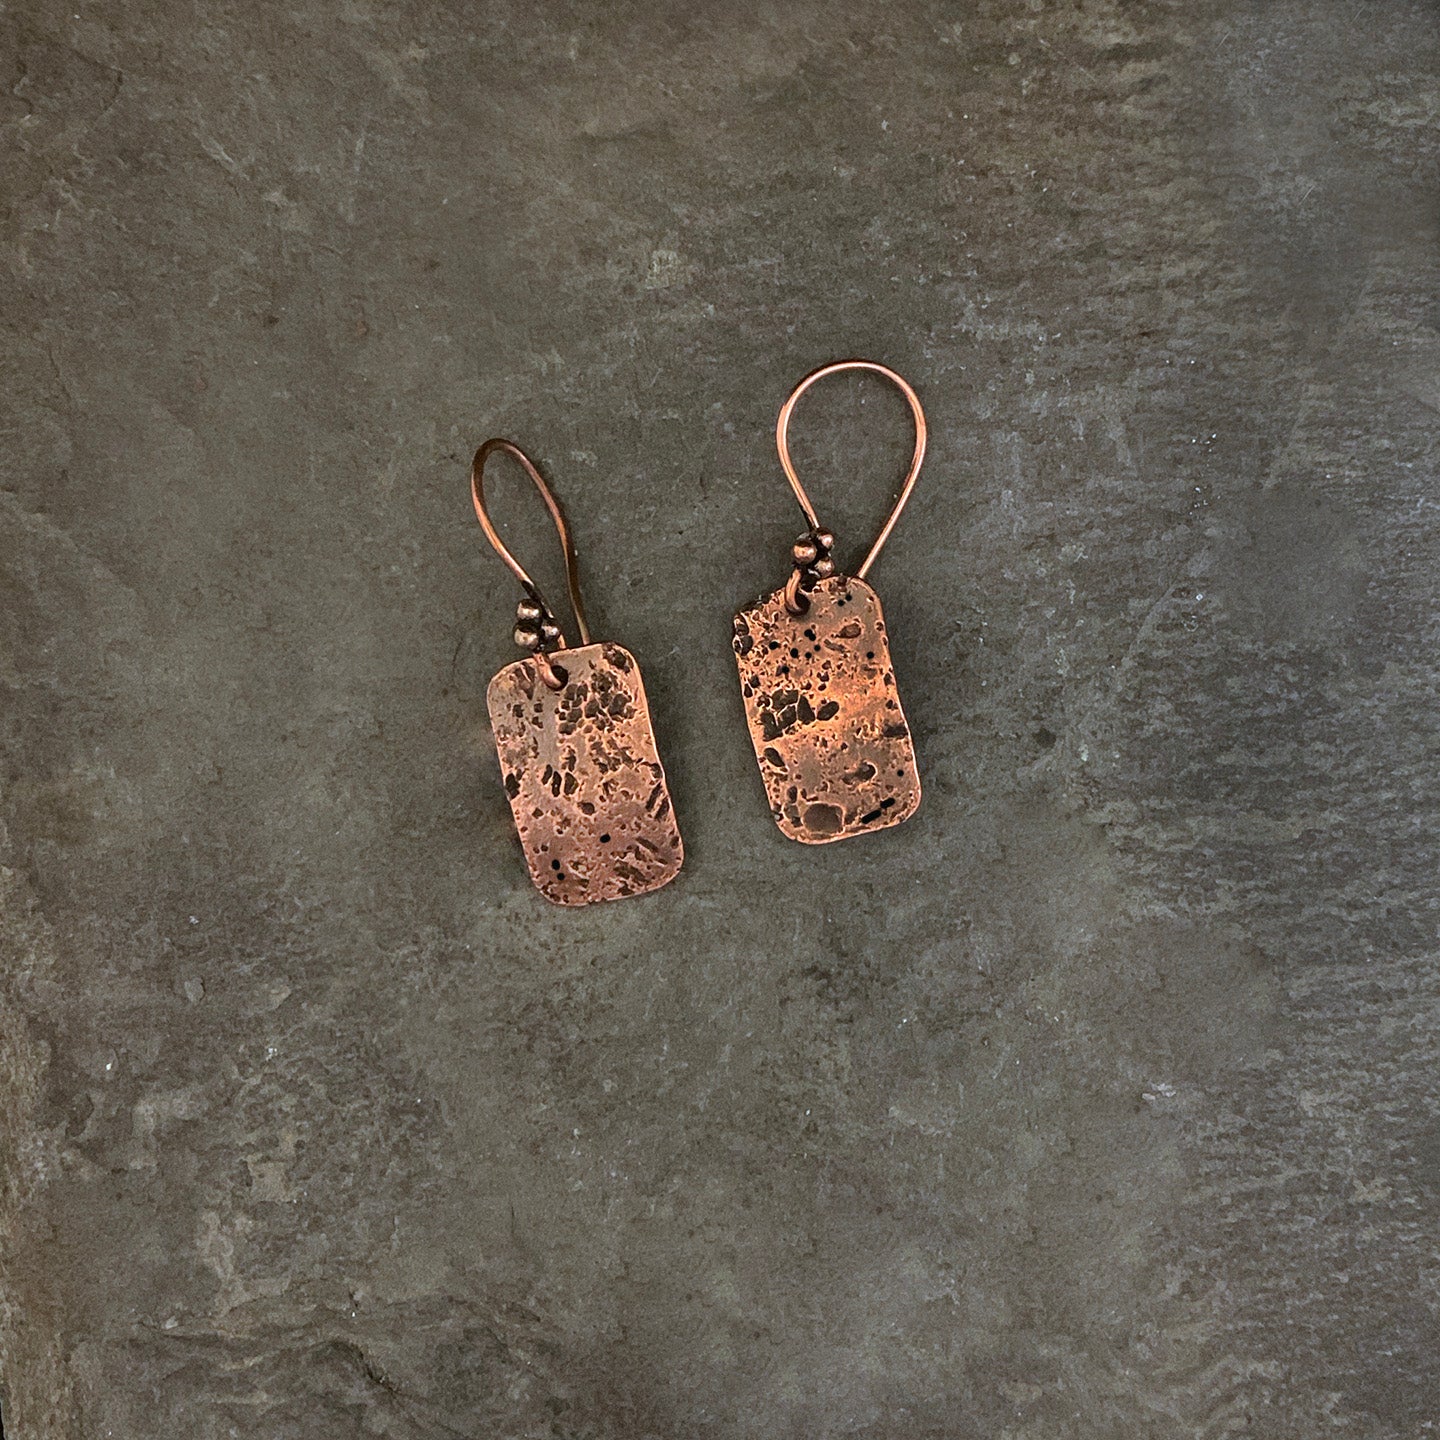 Copper Reticulated Earrings by Mary Anne Huntington